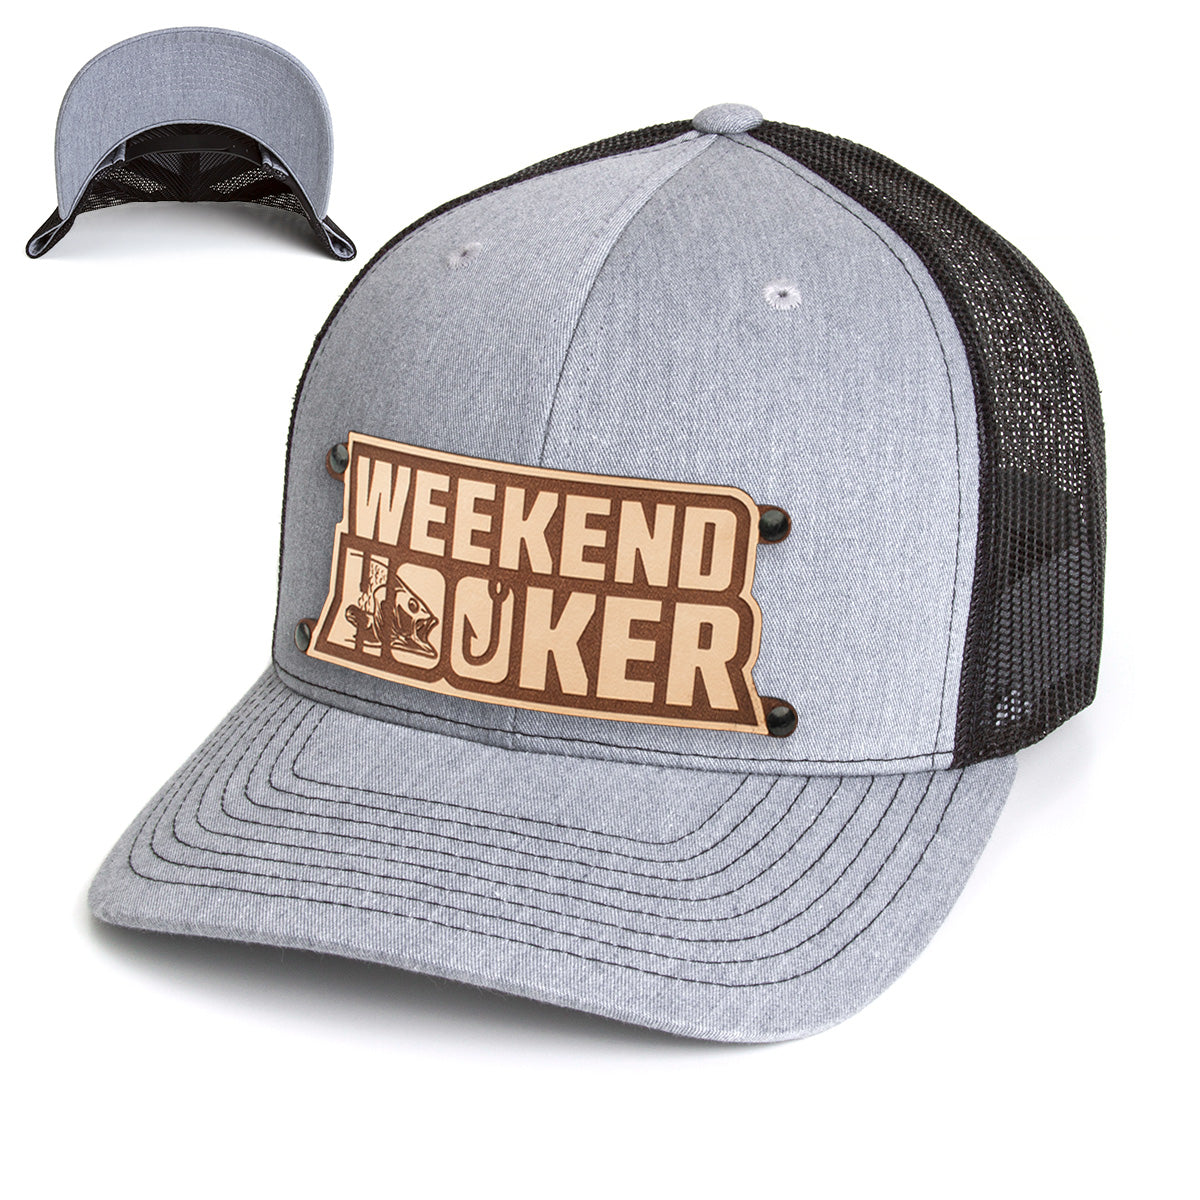 Weekend Hooker Fishing Hat - Breathable and Stylish Trucker Hat Olive & Blk Mesh TR